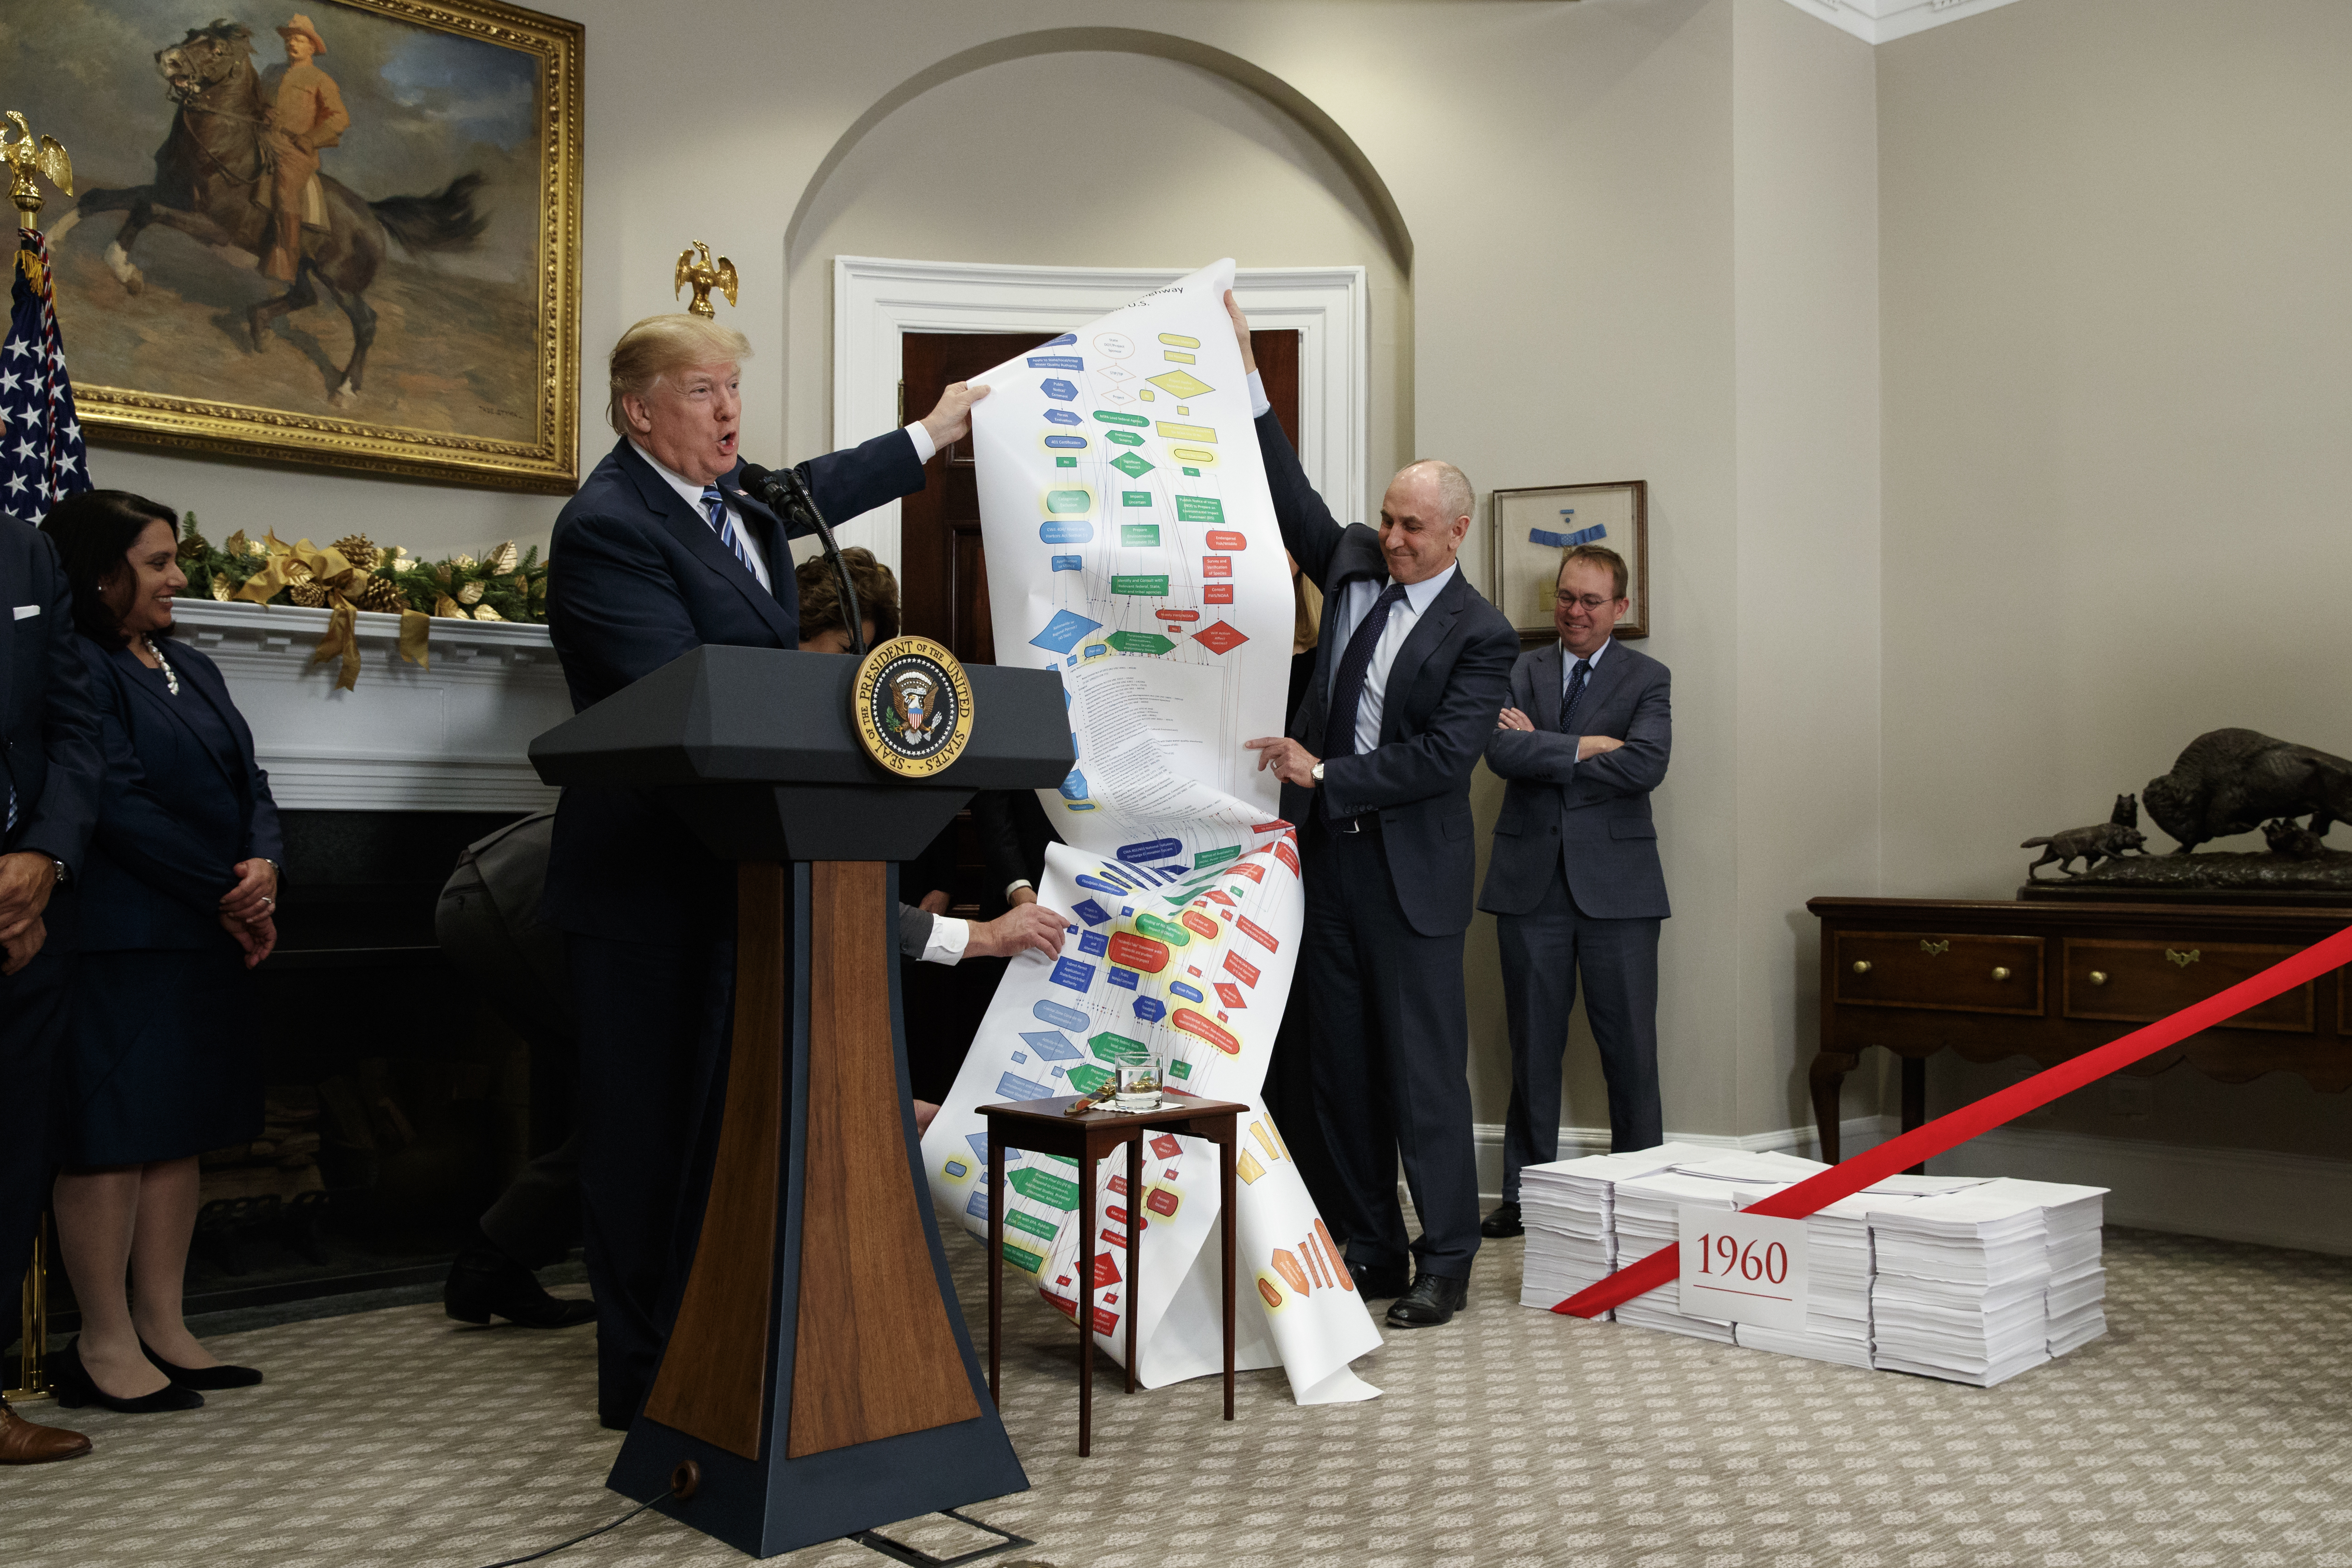 President Trump holds up a chart on highway regulations during an event on federal regulations in the White House's Roosevelt Room on December 14